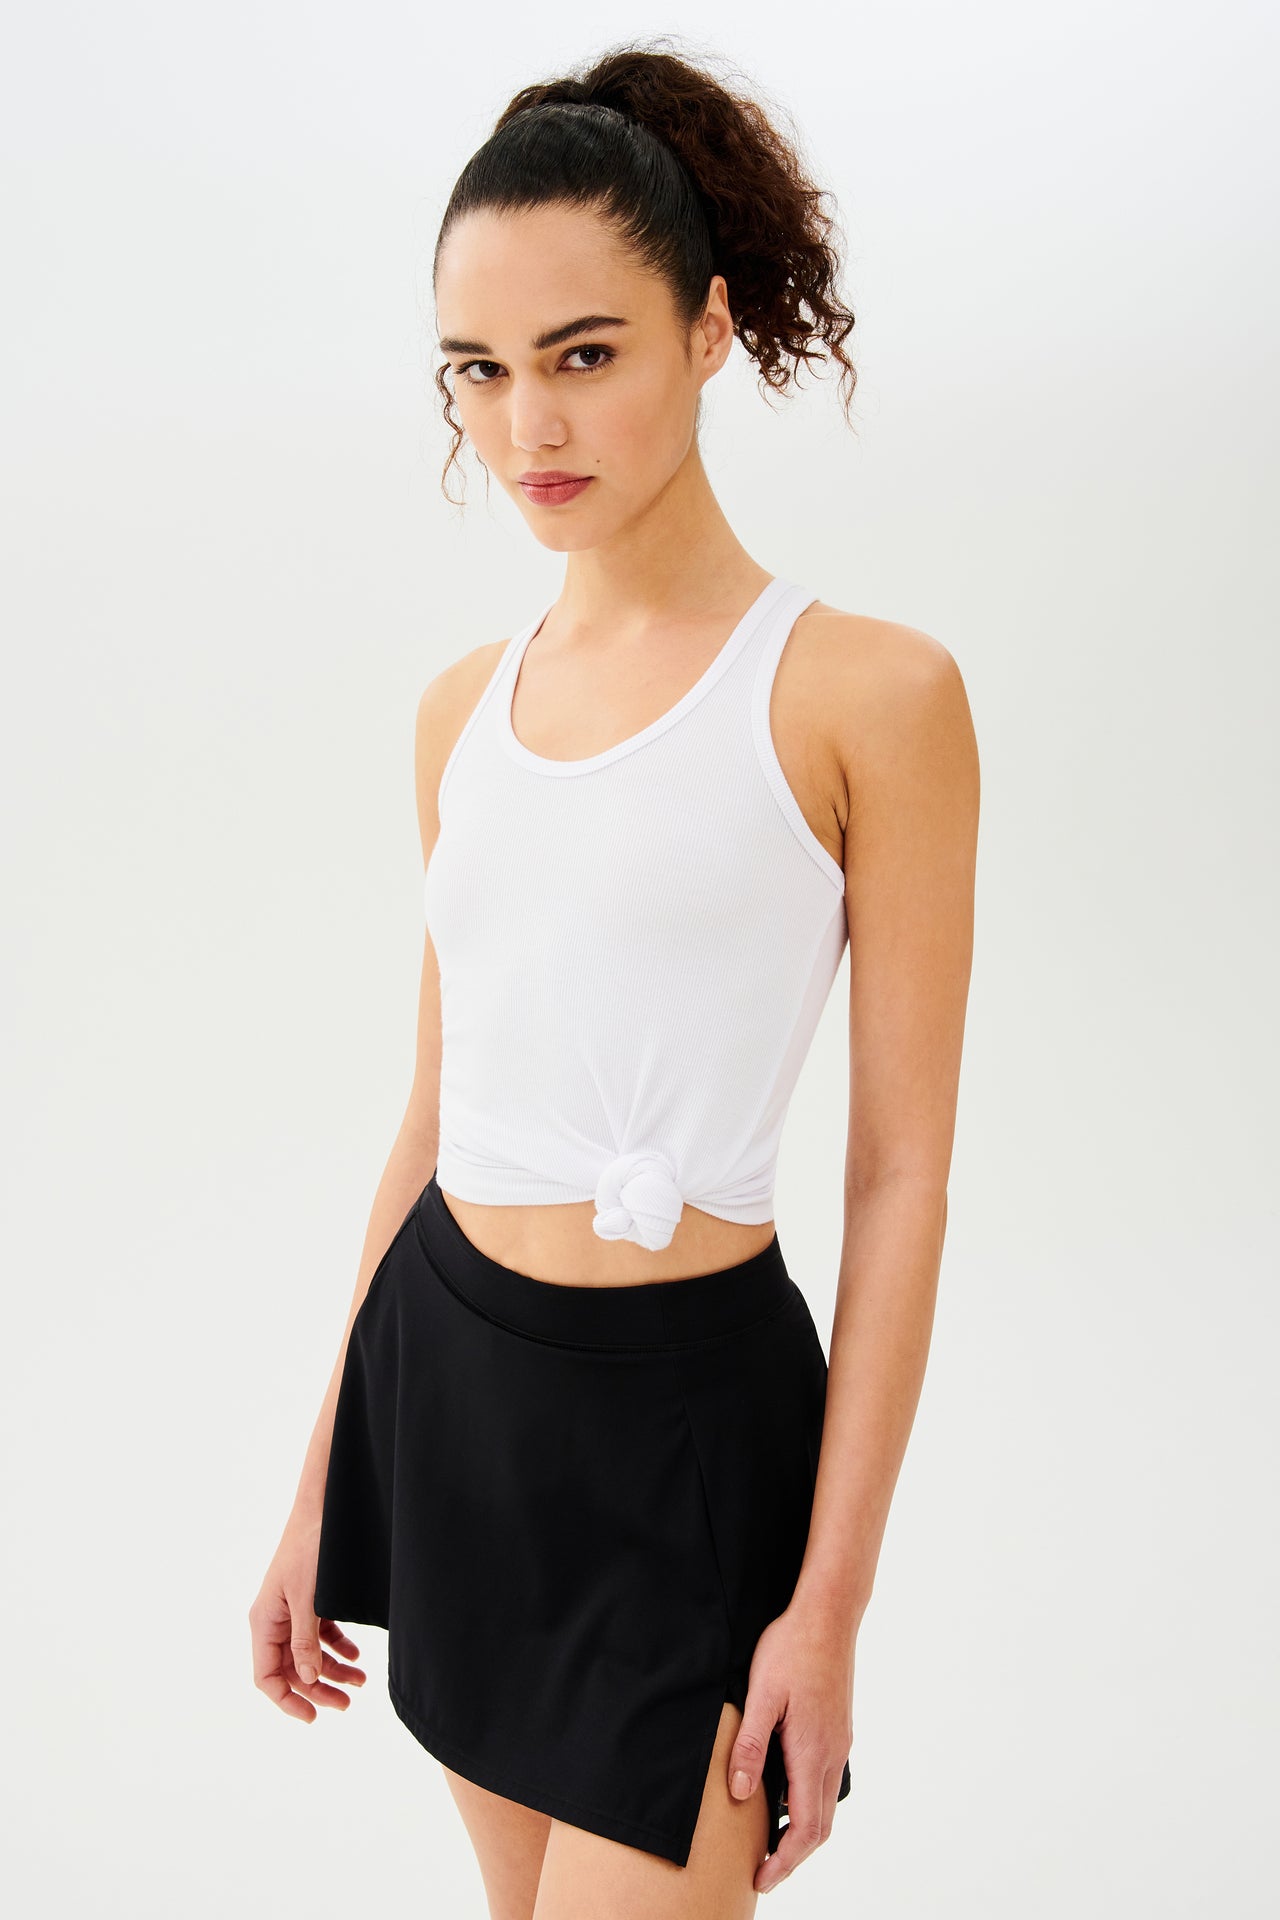 Front side view woman with dark curly hair in a ponytail wearing a white tank top with a tied knot and black skort 